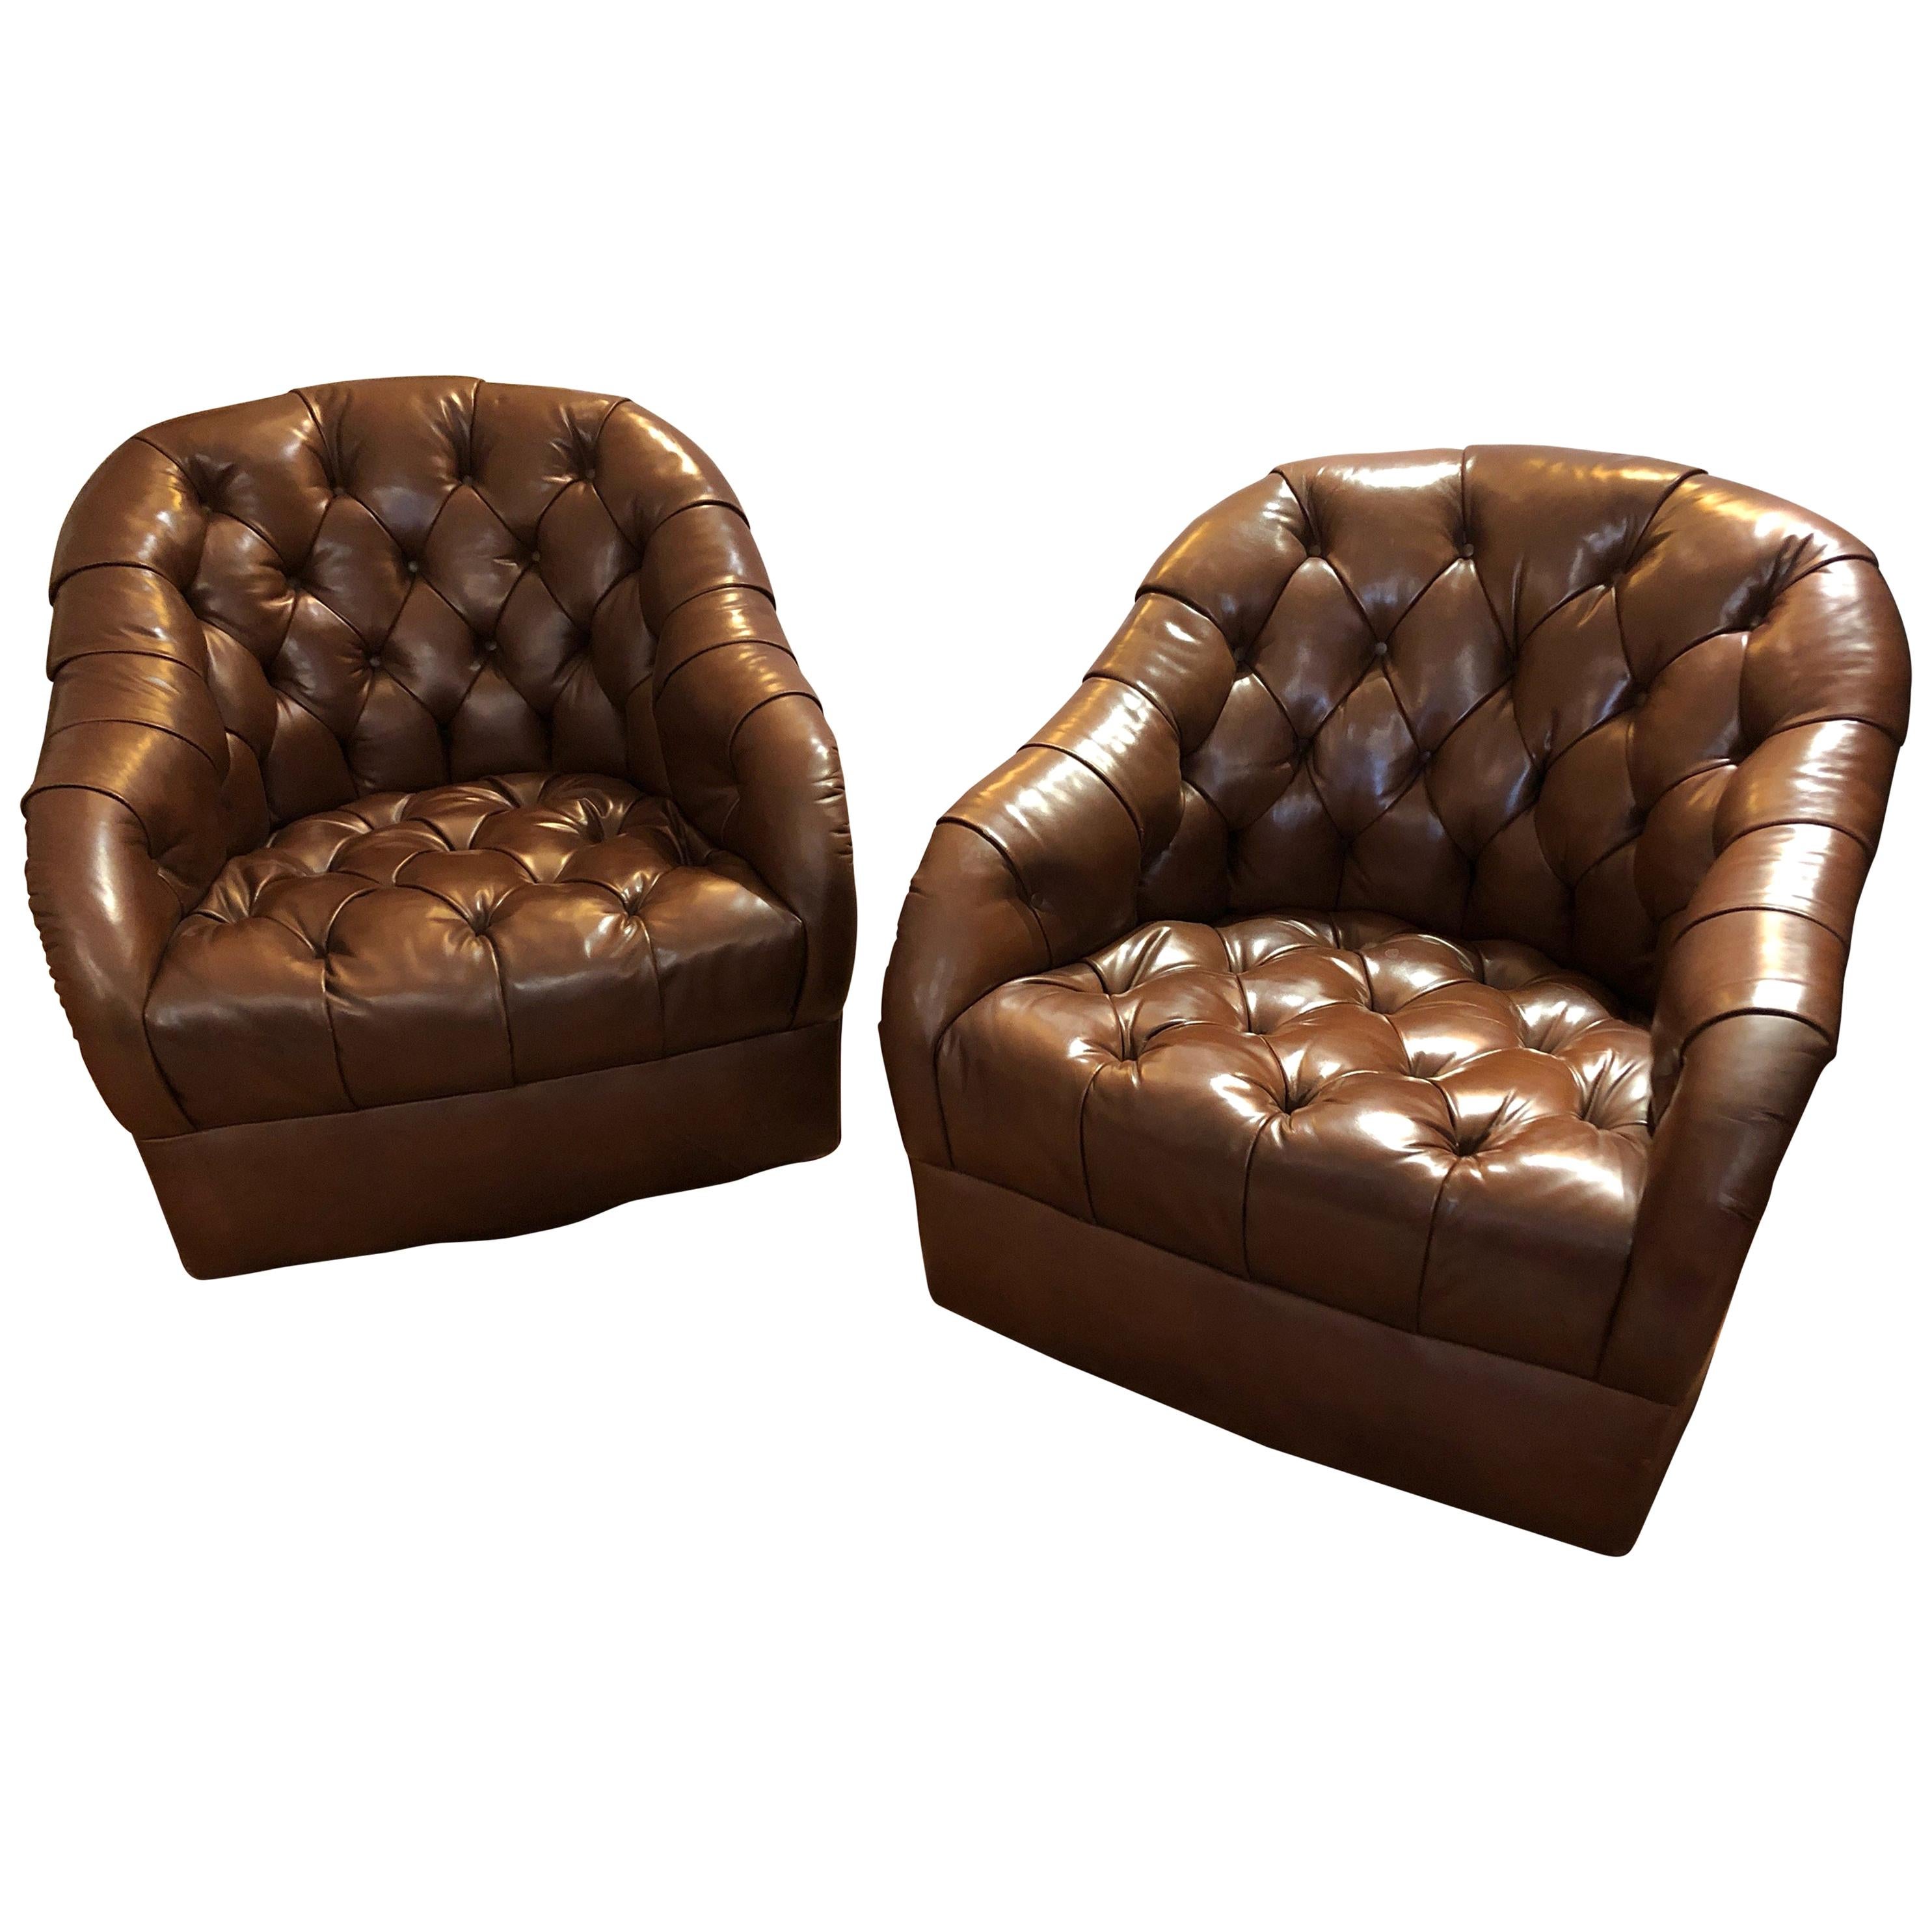 Sumptuous Tufted Ward Bennett Swivel Club Chairs in Original Supple Leather Pair